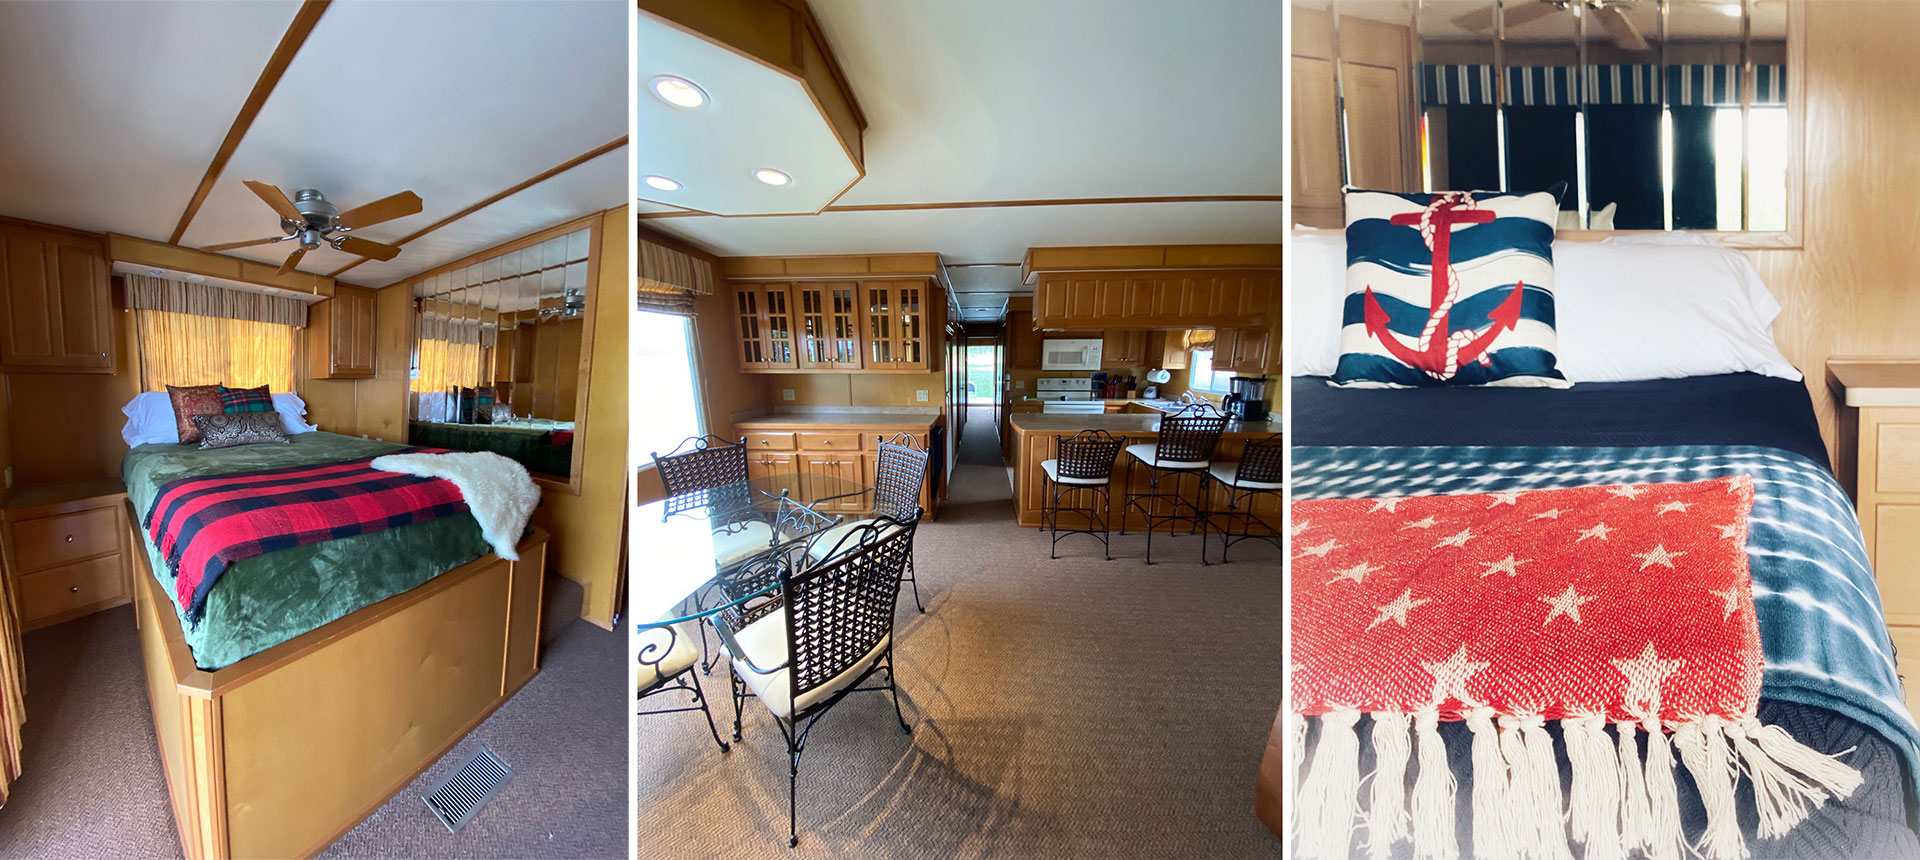 Interiors of houseboats